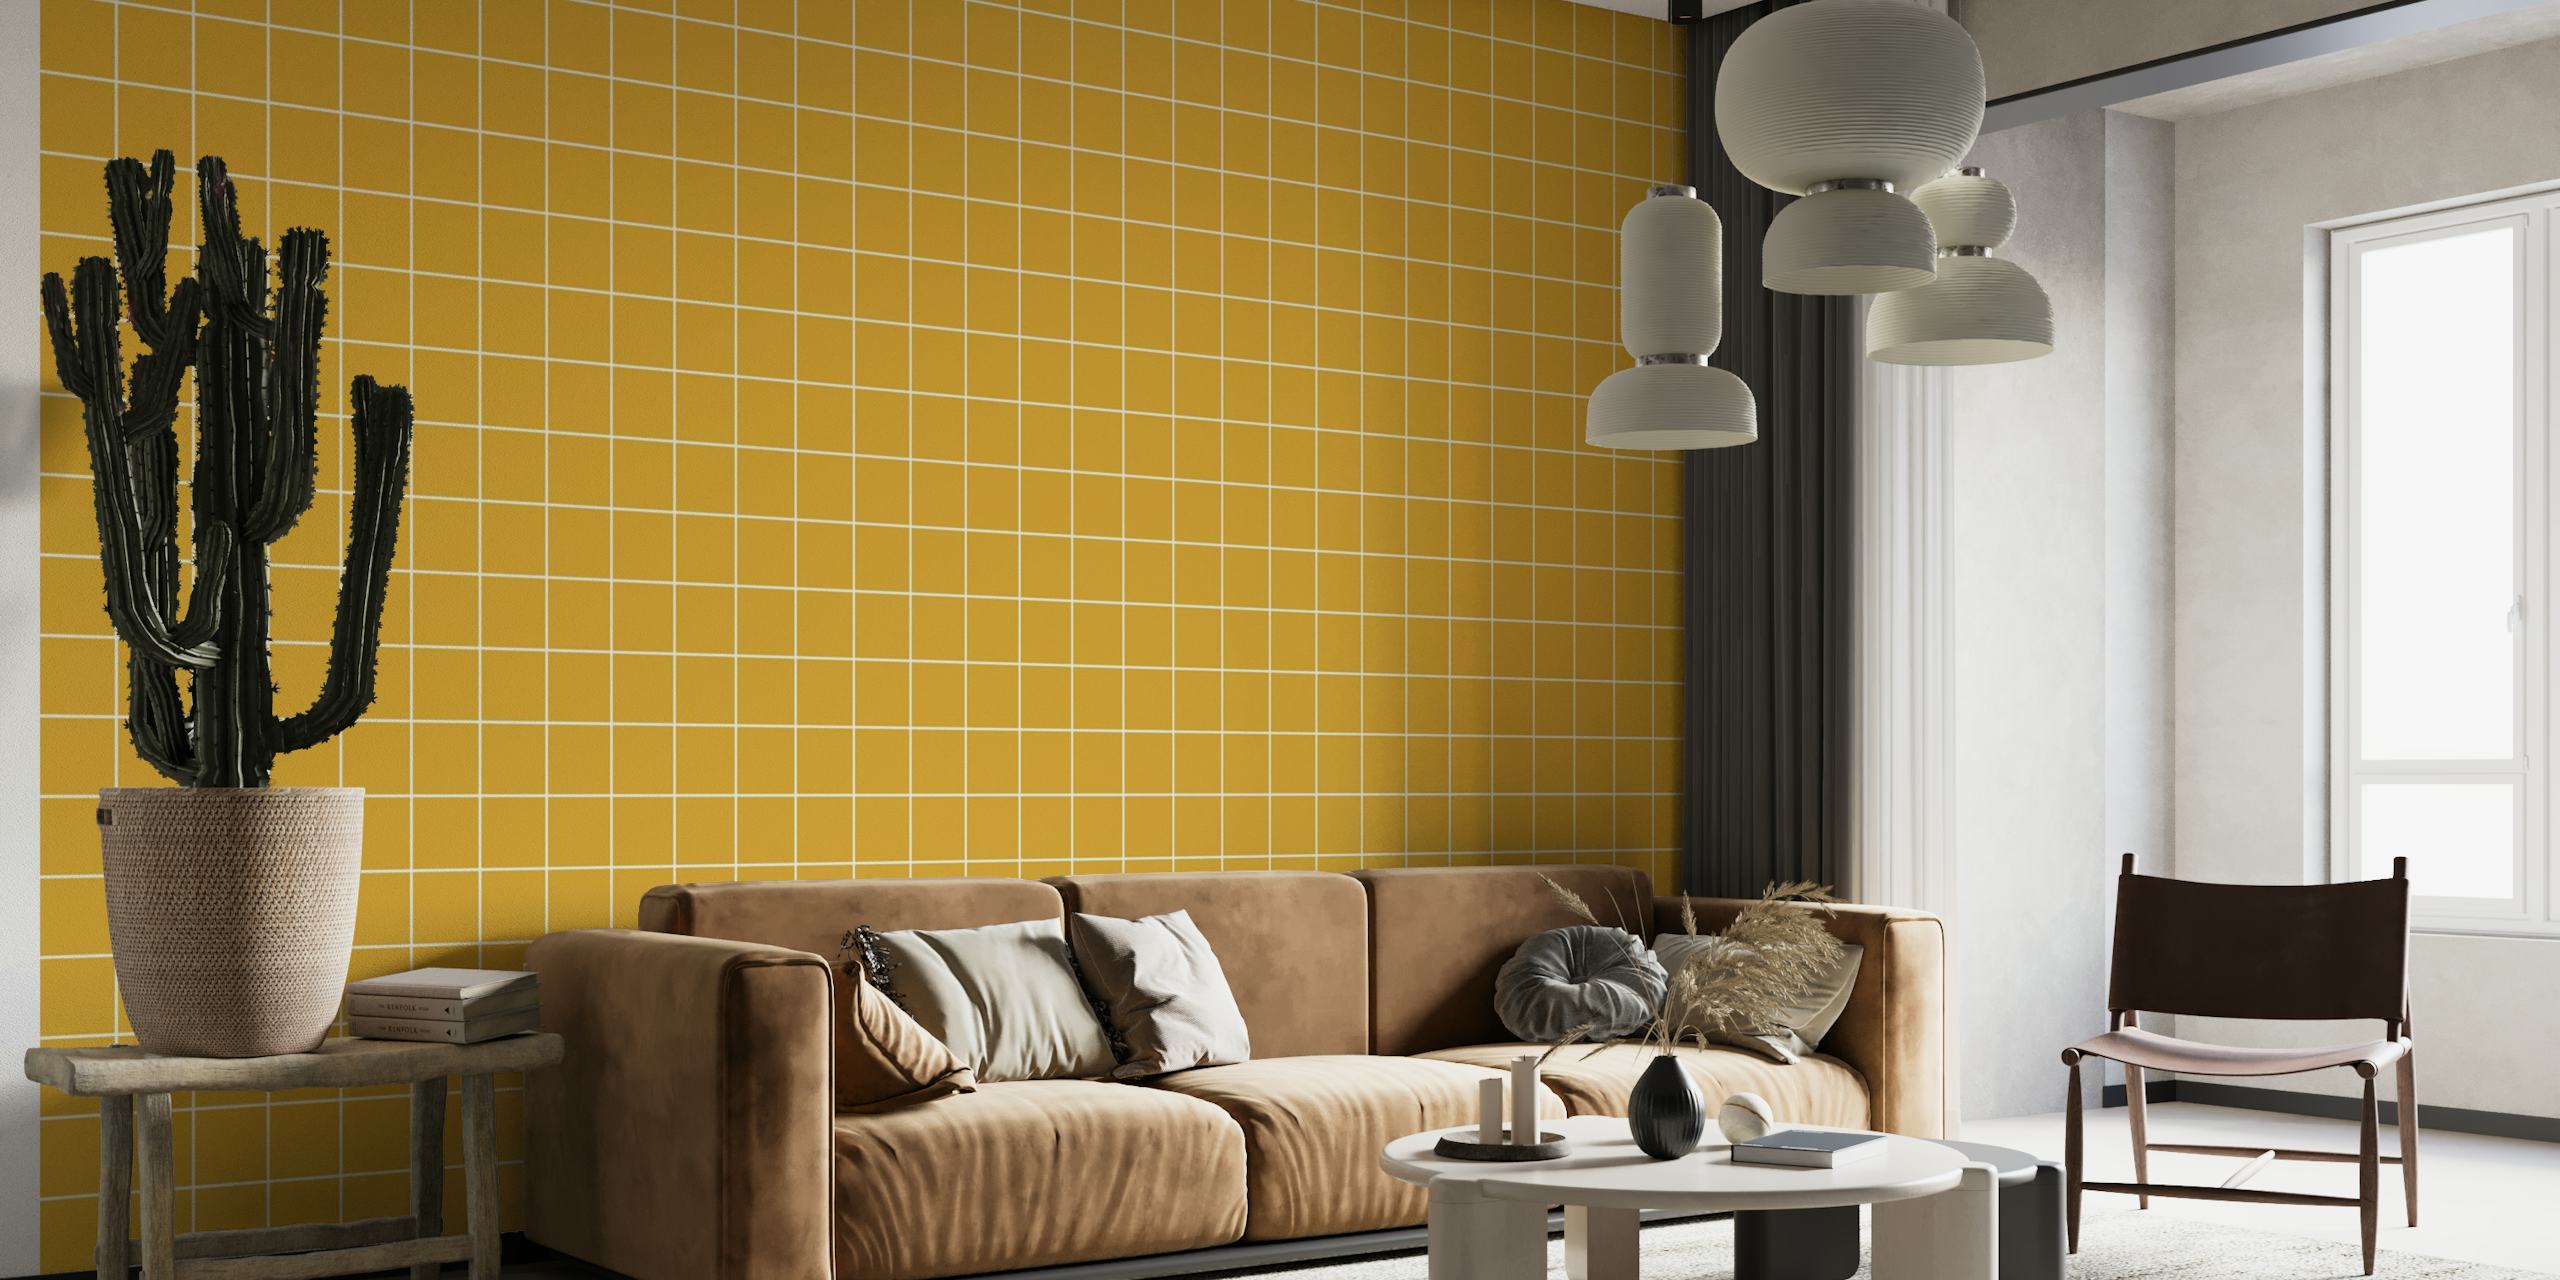 Grid Pattern - Mustard Yellow with Small Grid ταπετσαρία